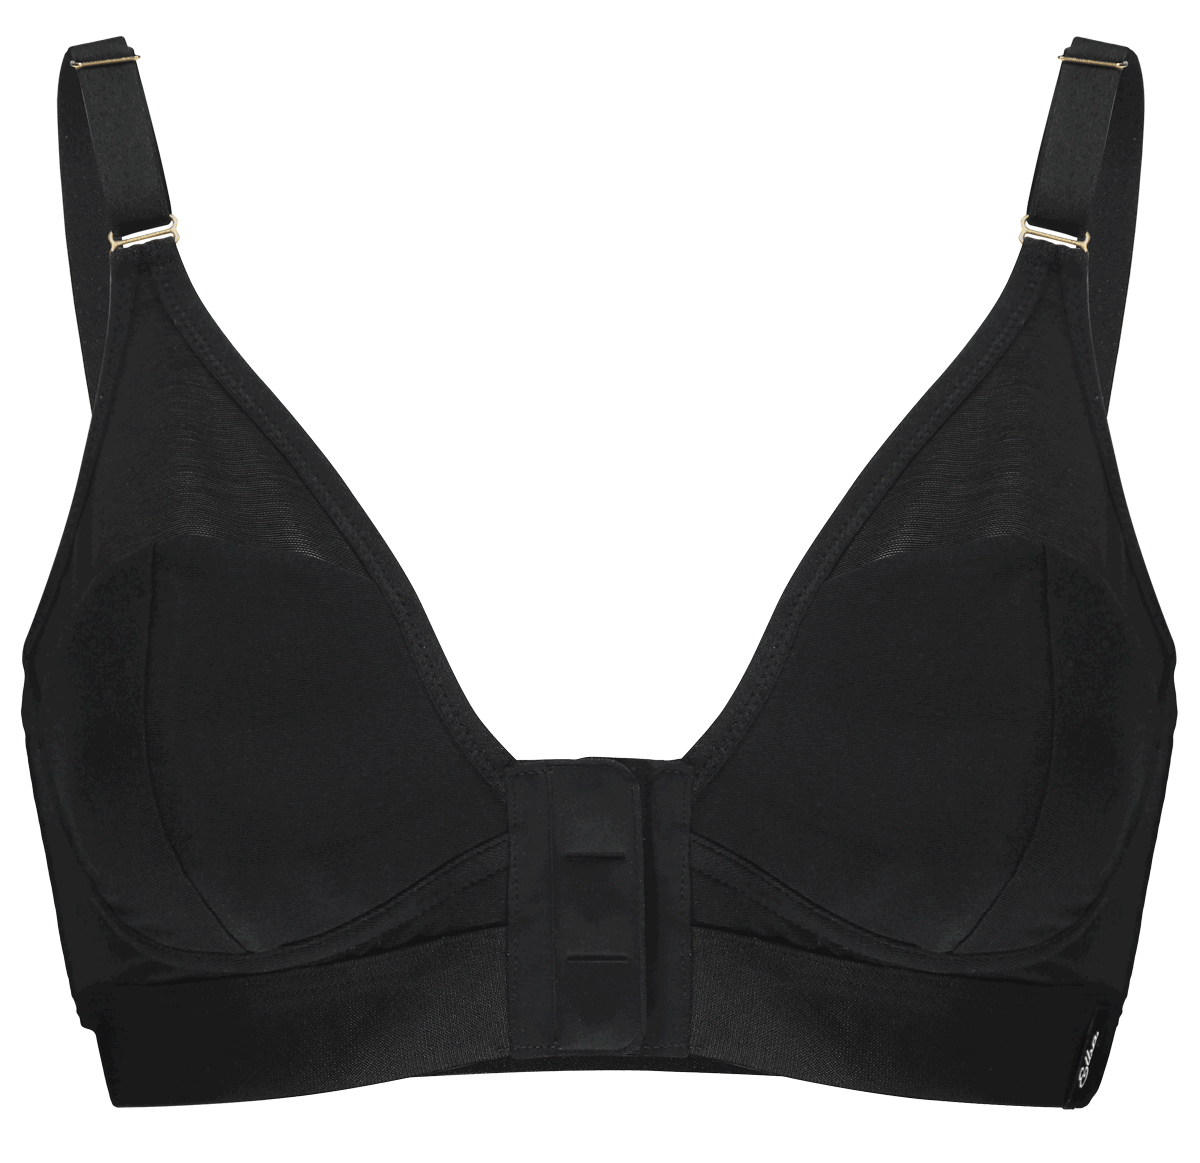 Image is an animated gif, which shows how the front-fastening magnets work on the Elba London adaptive bra in black